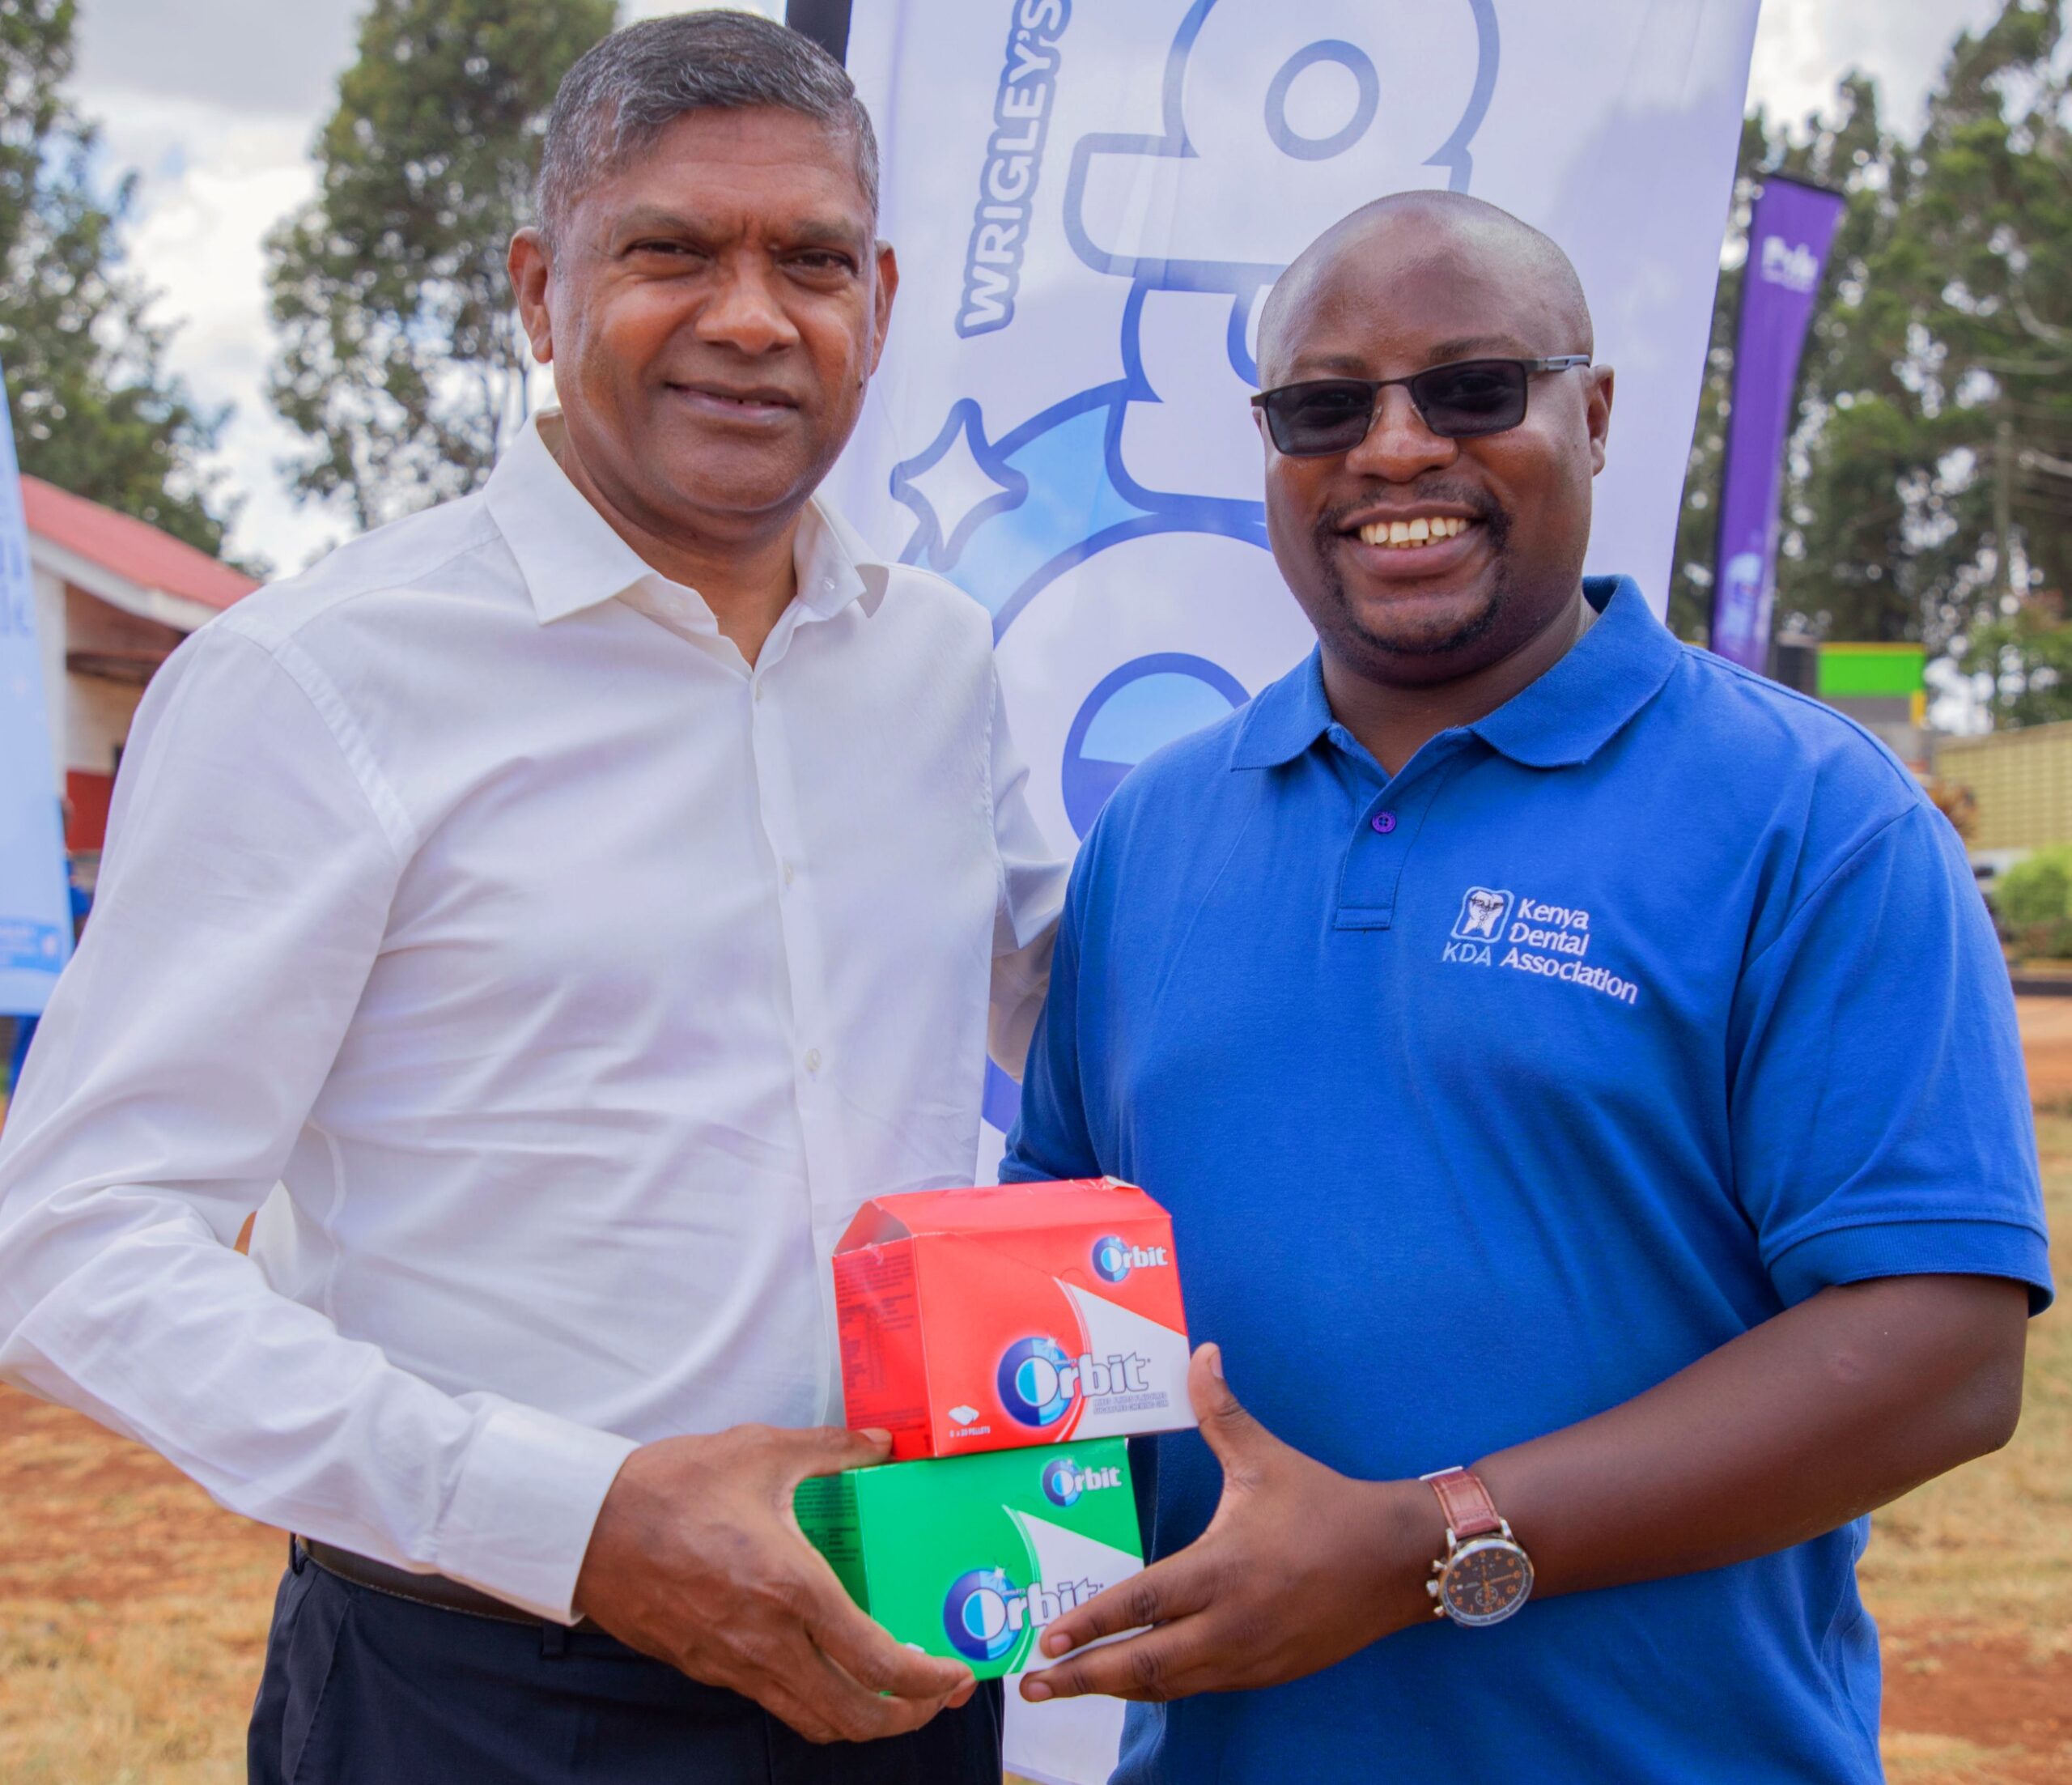 Vivian Maduray, Plant Director Mars Wrigley (left) presents sugar free gum to Dr. Douglas Oramis- Secretary General Kenya Dental Association (KDA) during the World Oral Health day celebrations held in Kiambu County. KDA unveiled its first cohort of 400 Community Health Promoters (CHPs), who completed training in basic preventive and promotive oral health support. The graduates were issued with certificates during the celebration to mark the World Oral Health Day at Ndumberi Stadium in Kiambu county.